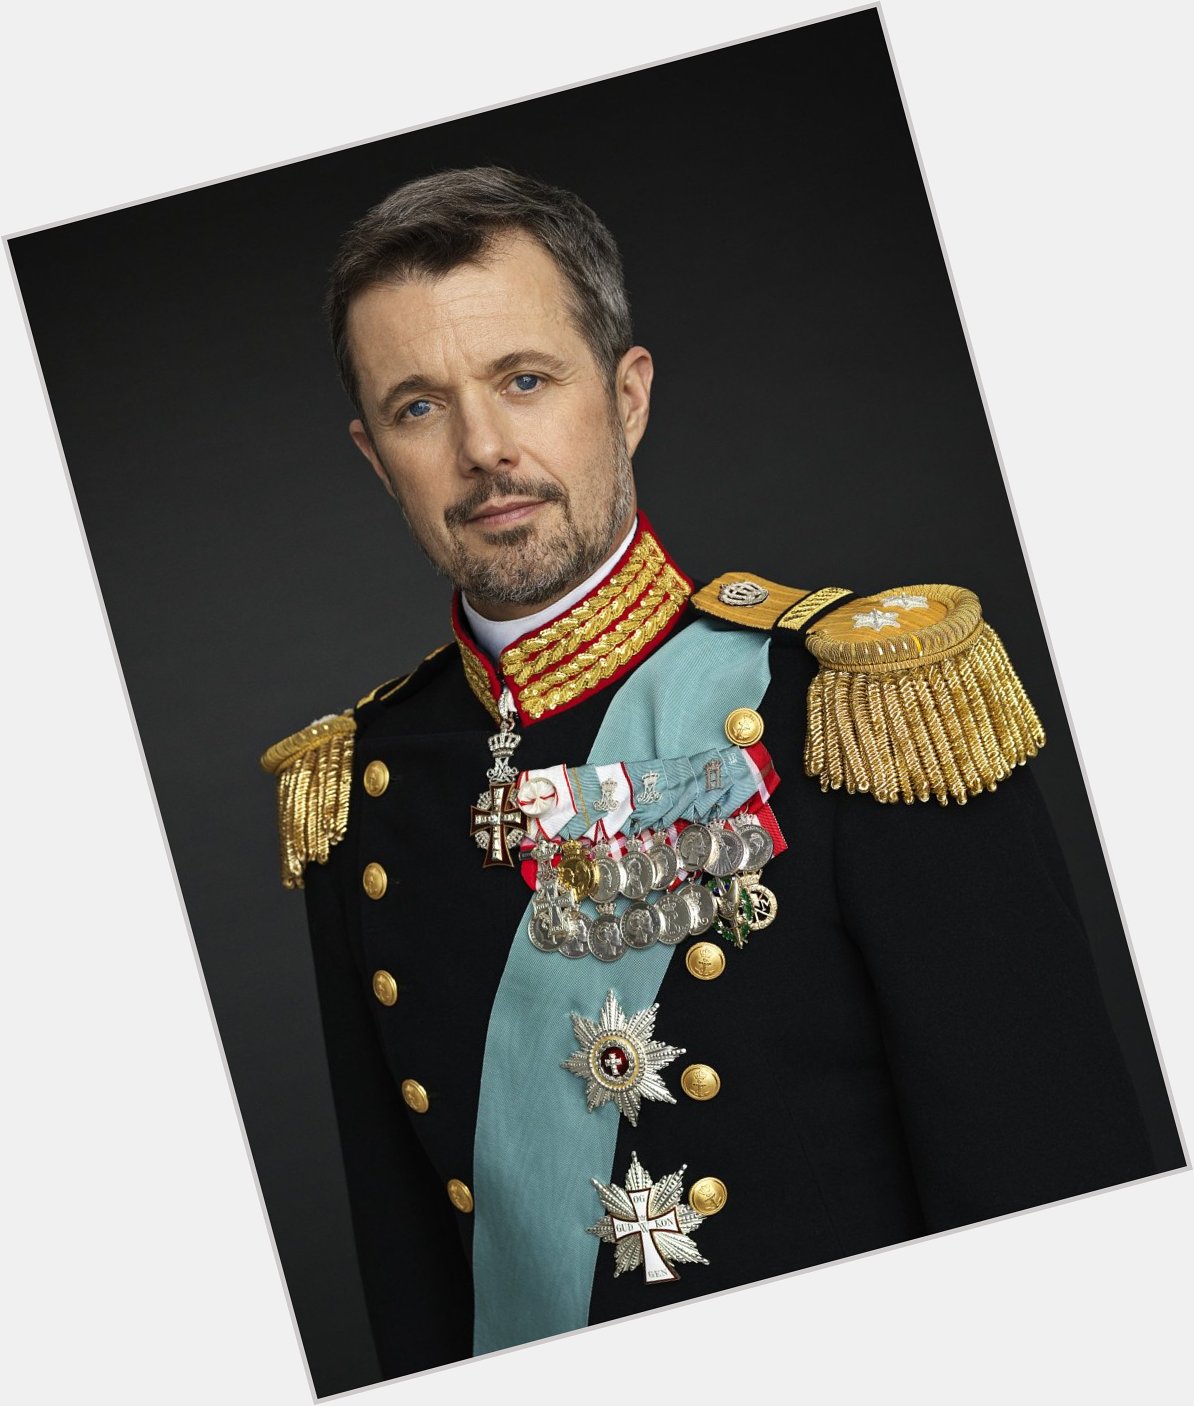 Happy 50th birthday to His Royal Highness Crown Prince Frederik! 